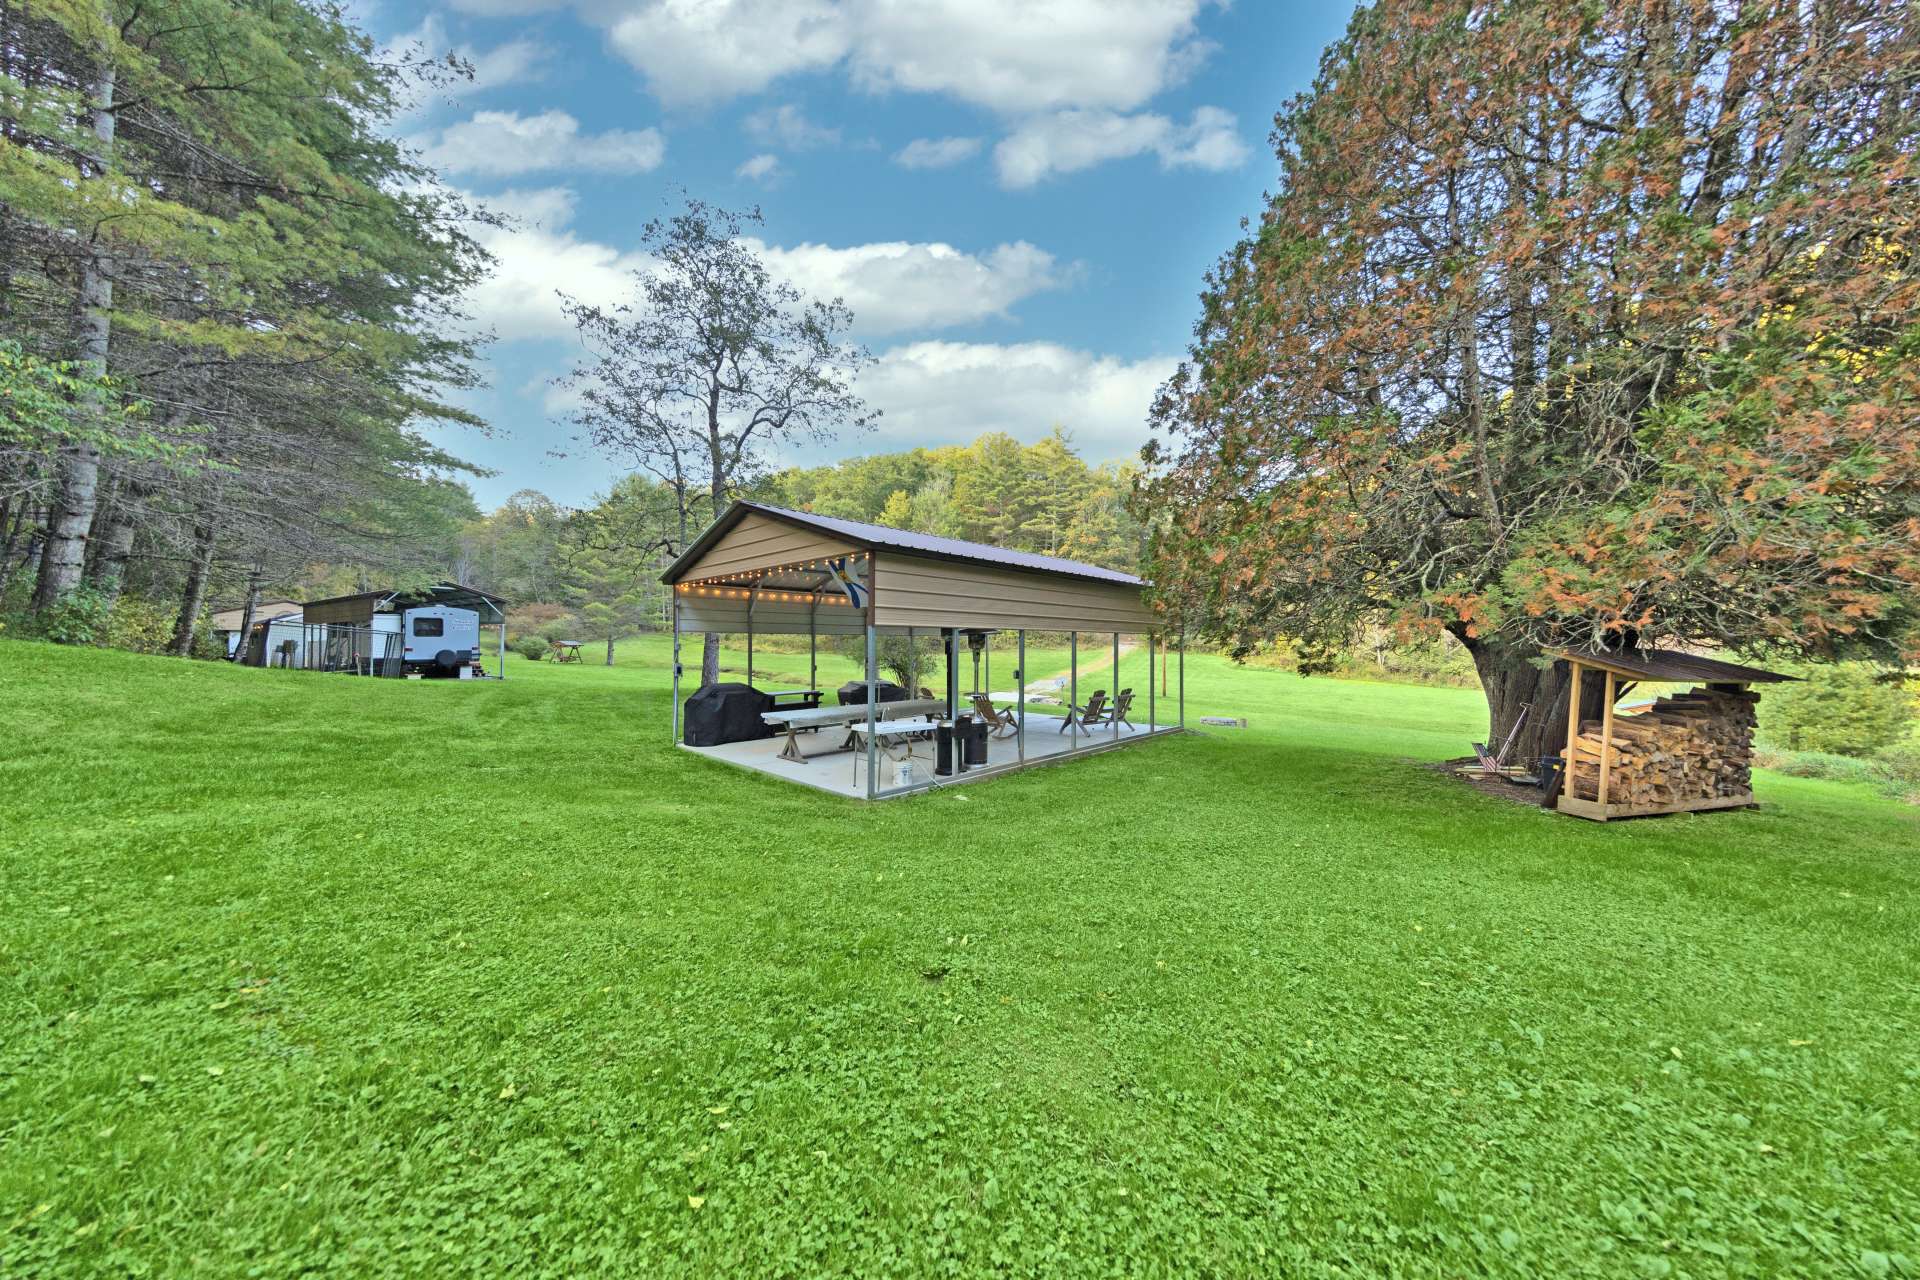 Large Covered Picnic Area